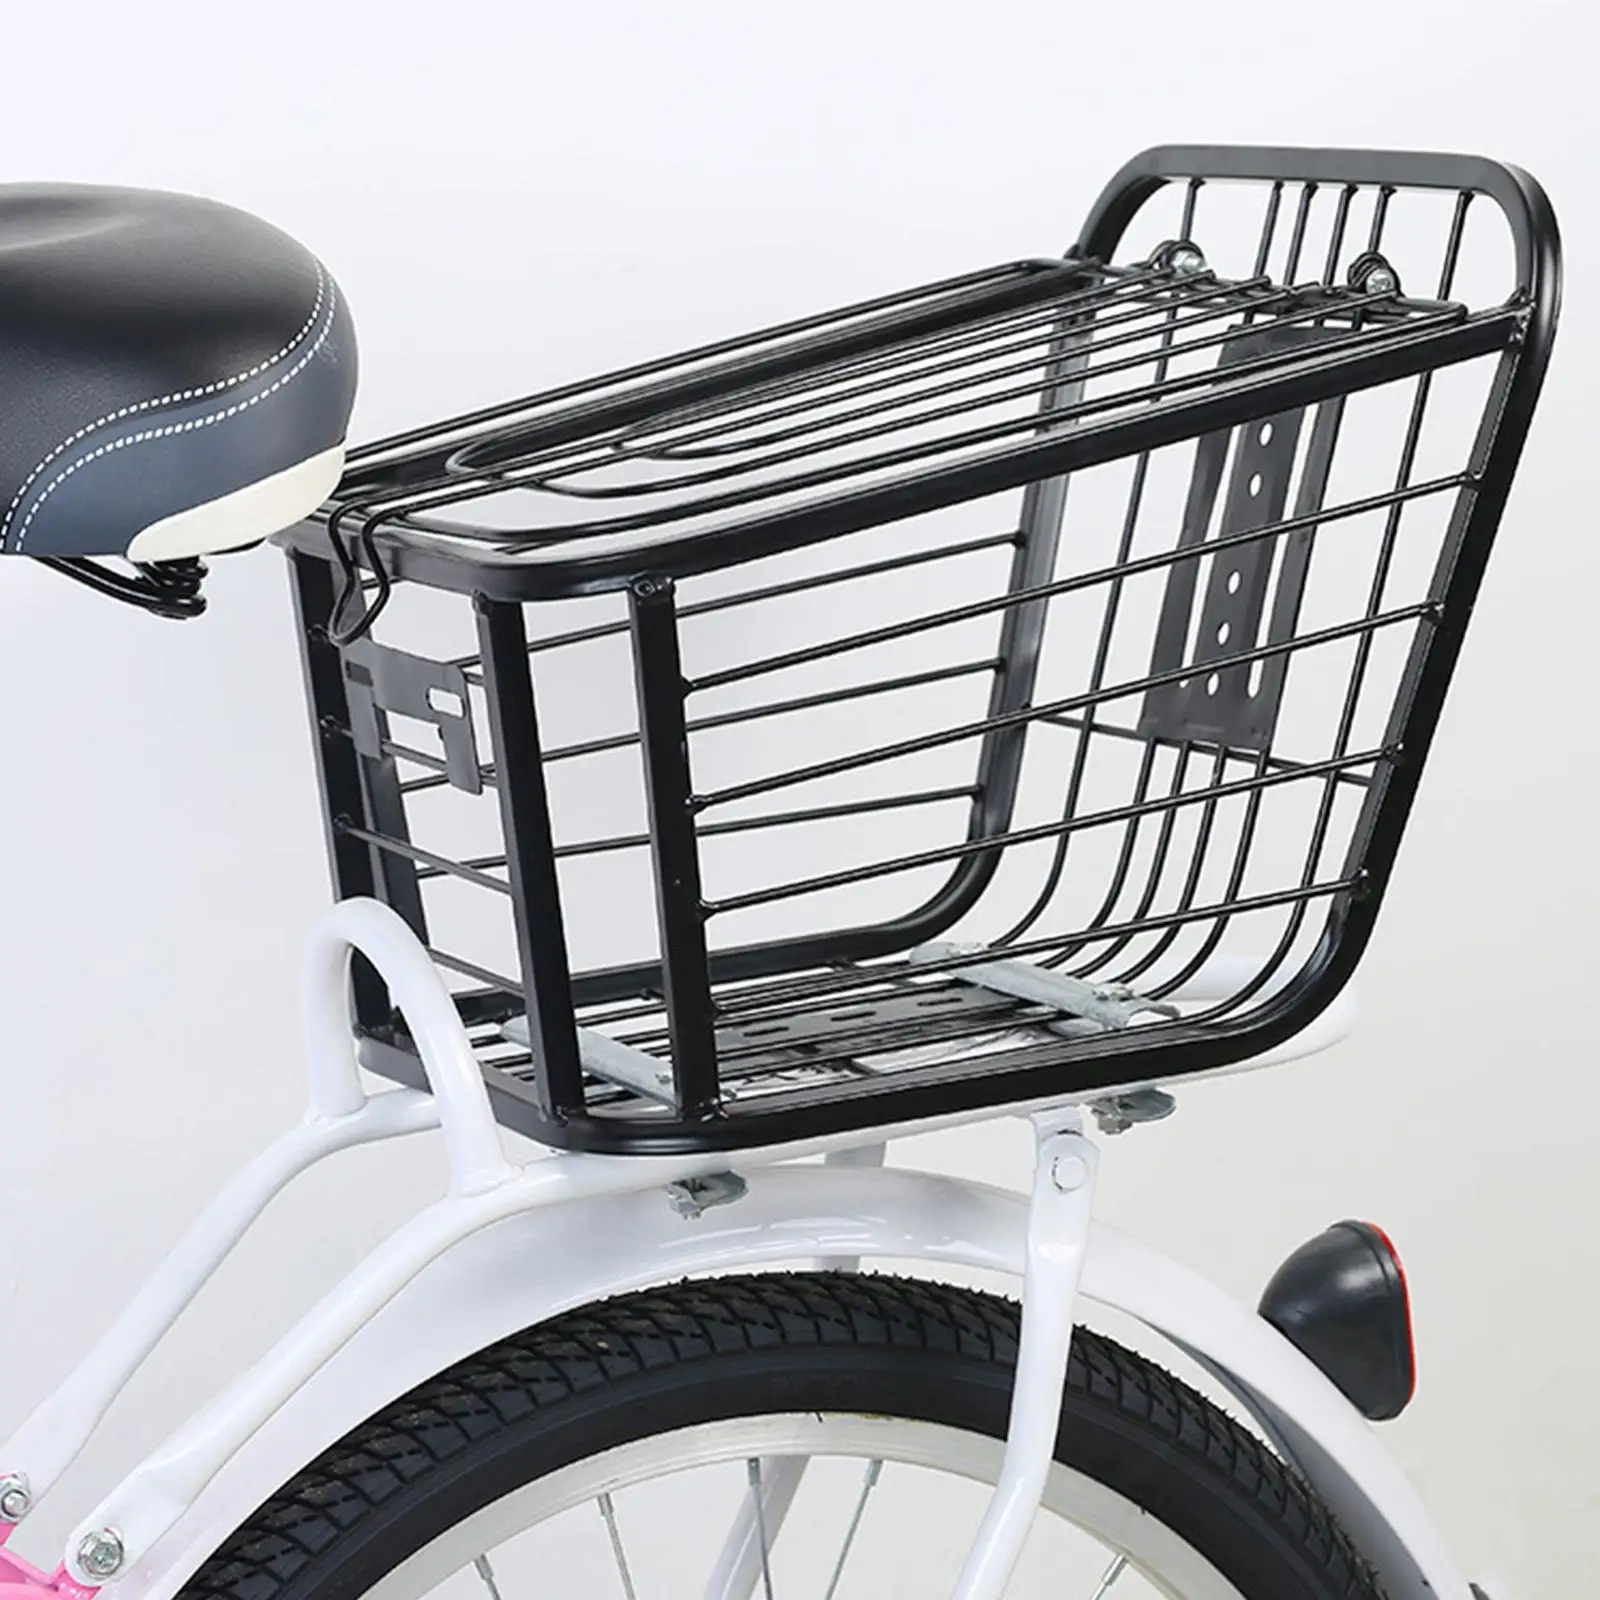 Rear Bike Basket Durable Hanging Wire Mesh Basket Bicycle Storage Basket for Cycling Road Bike Travel Women`s and Men`s Riding